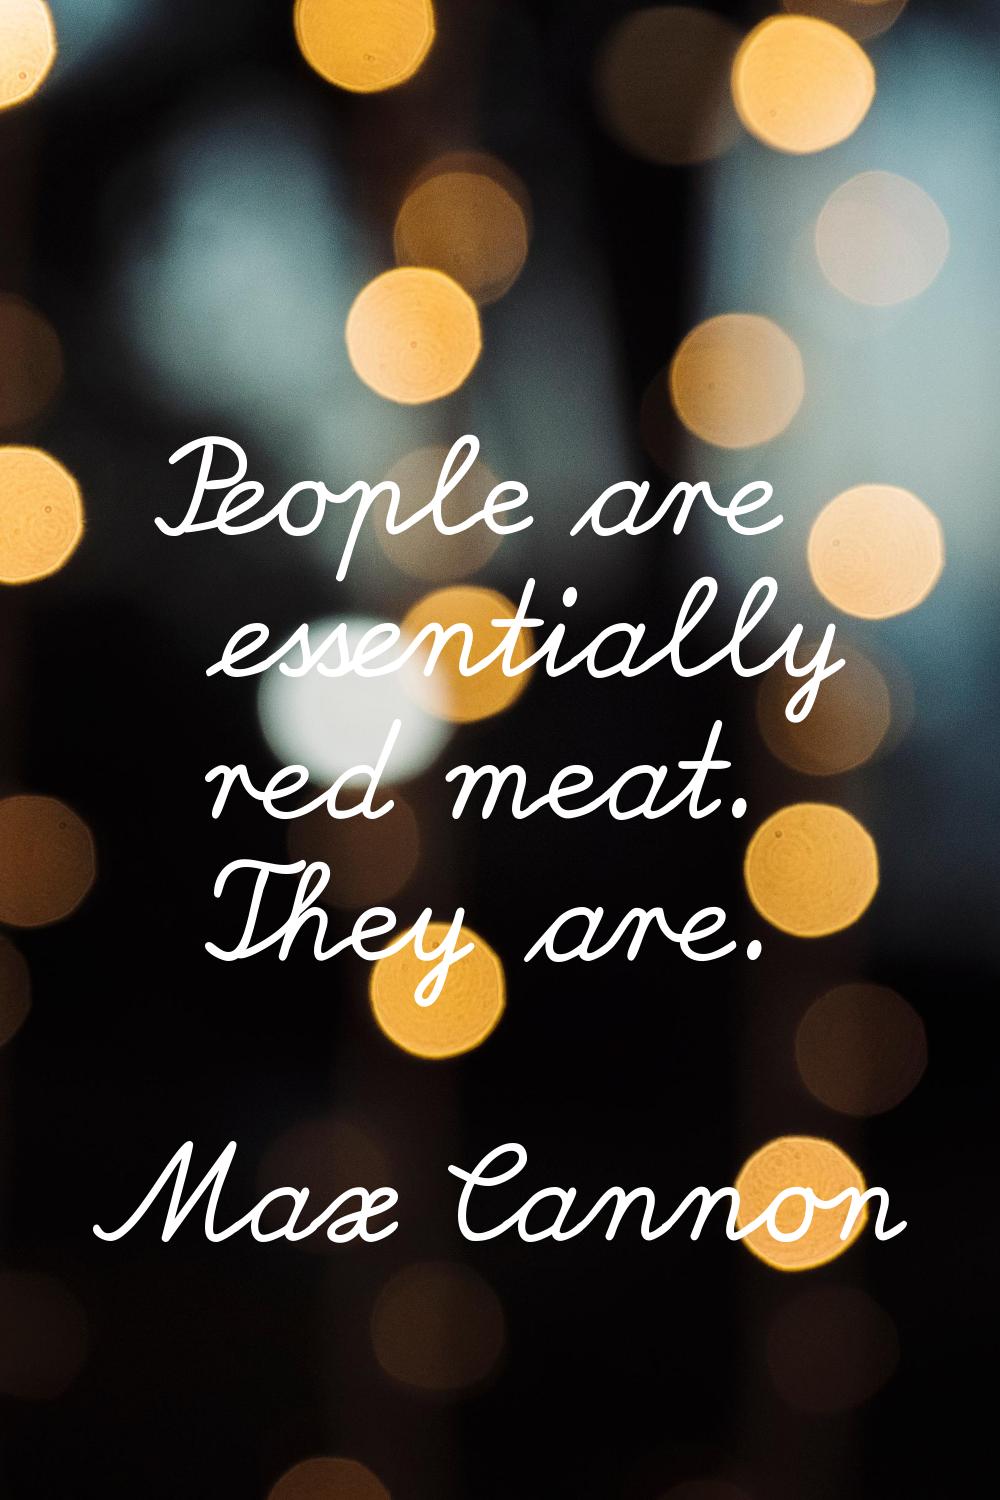 People are essentially red meat. They are.